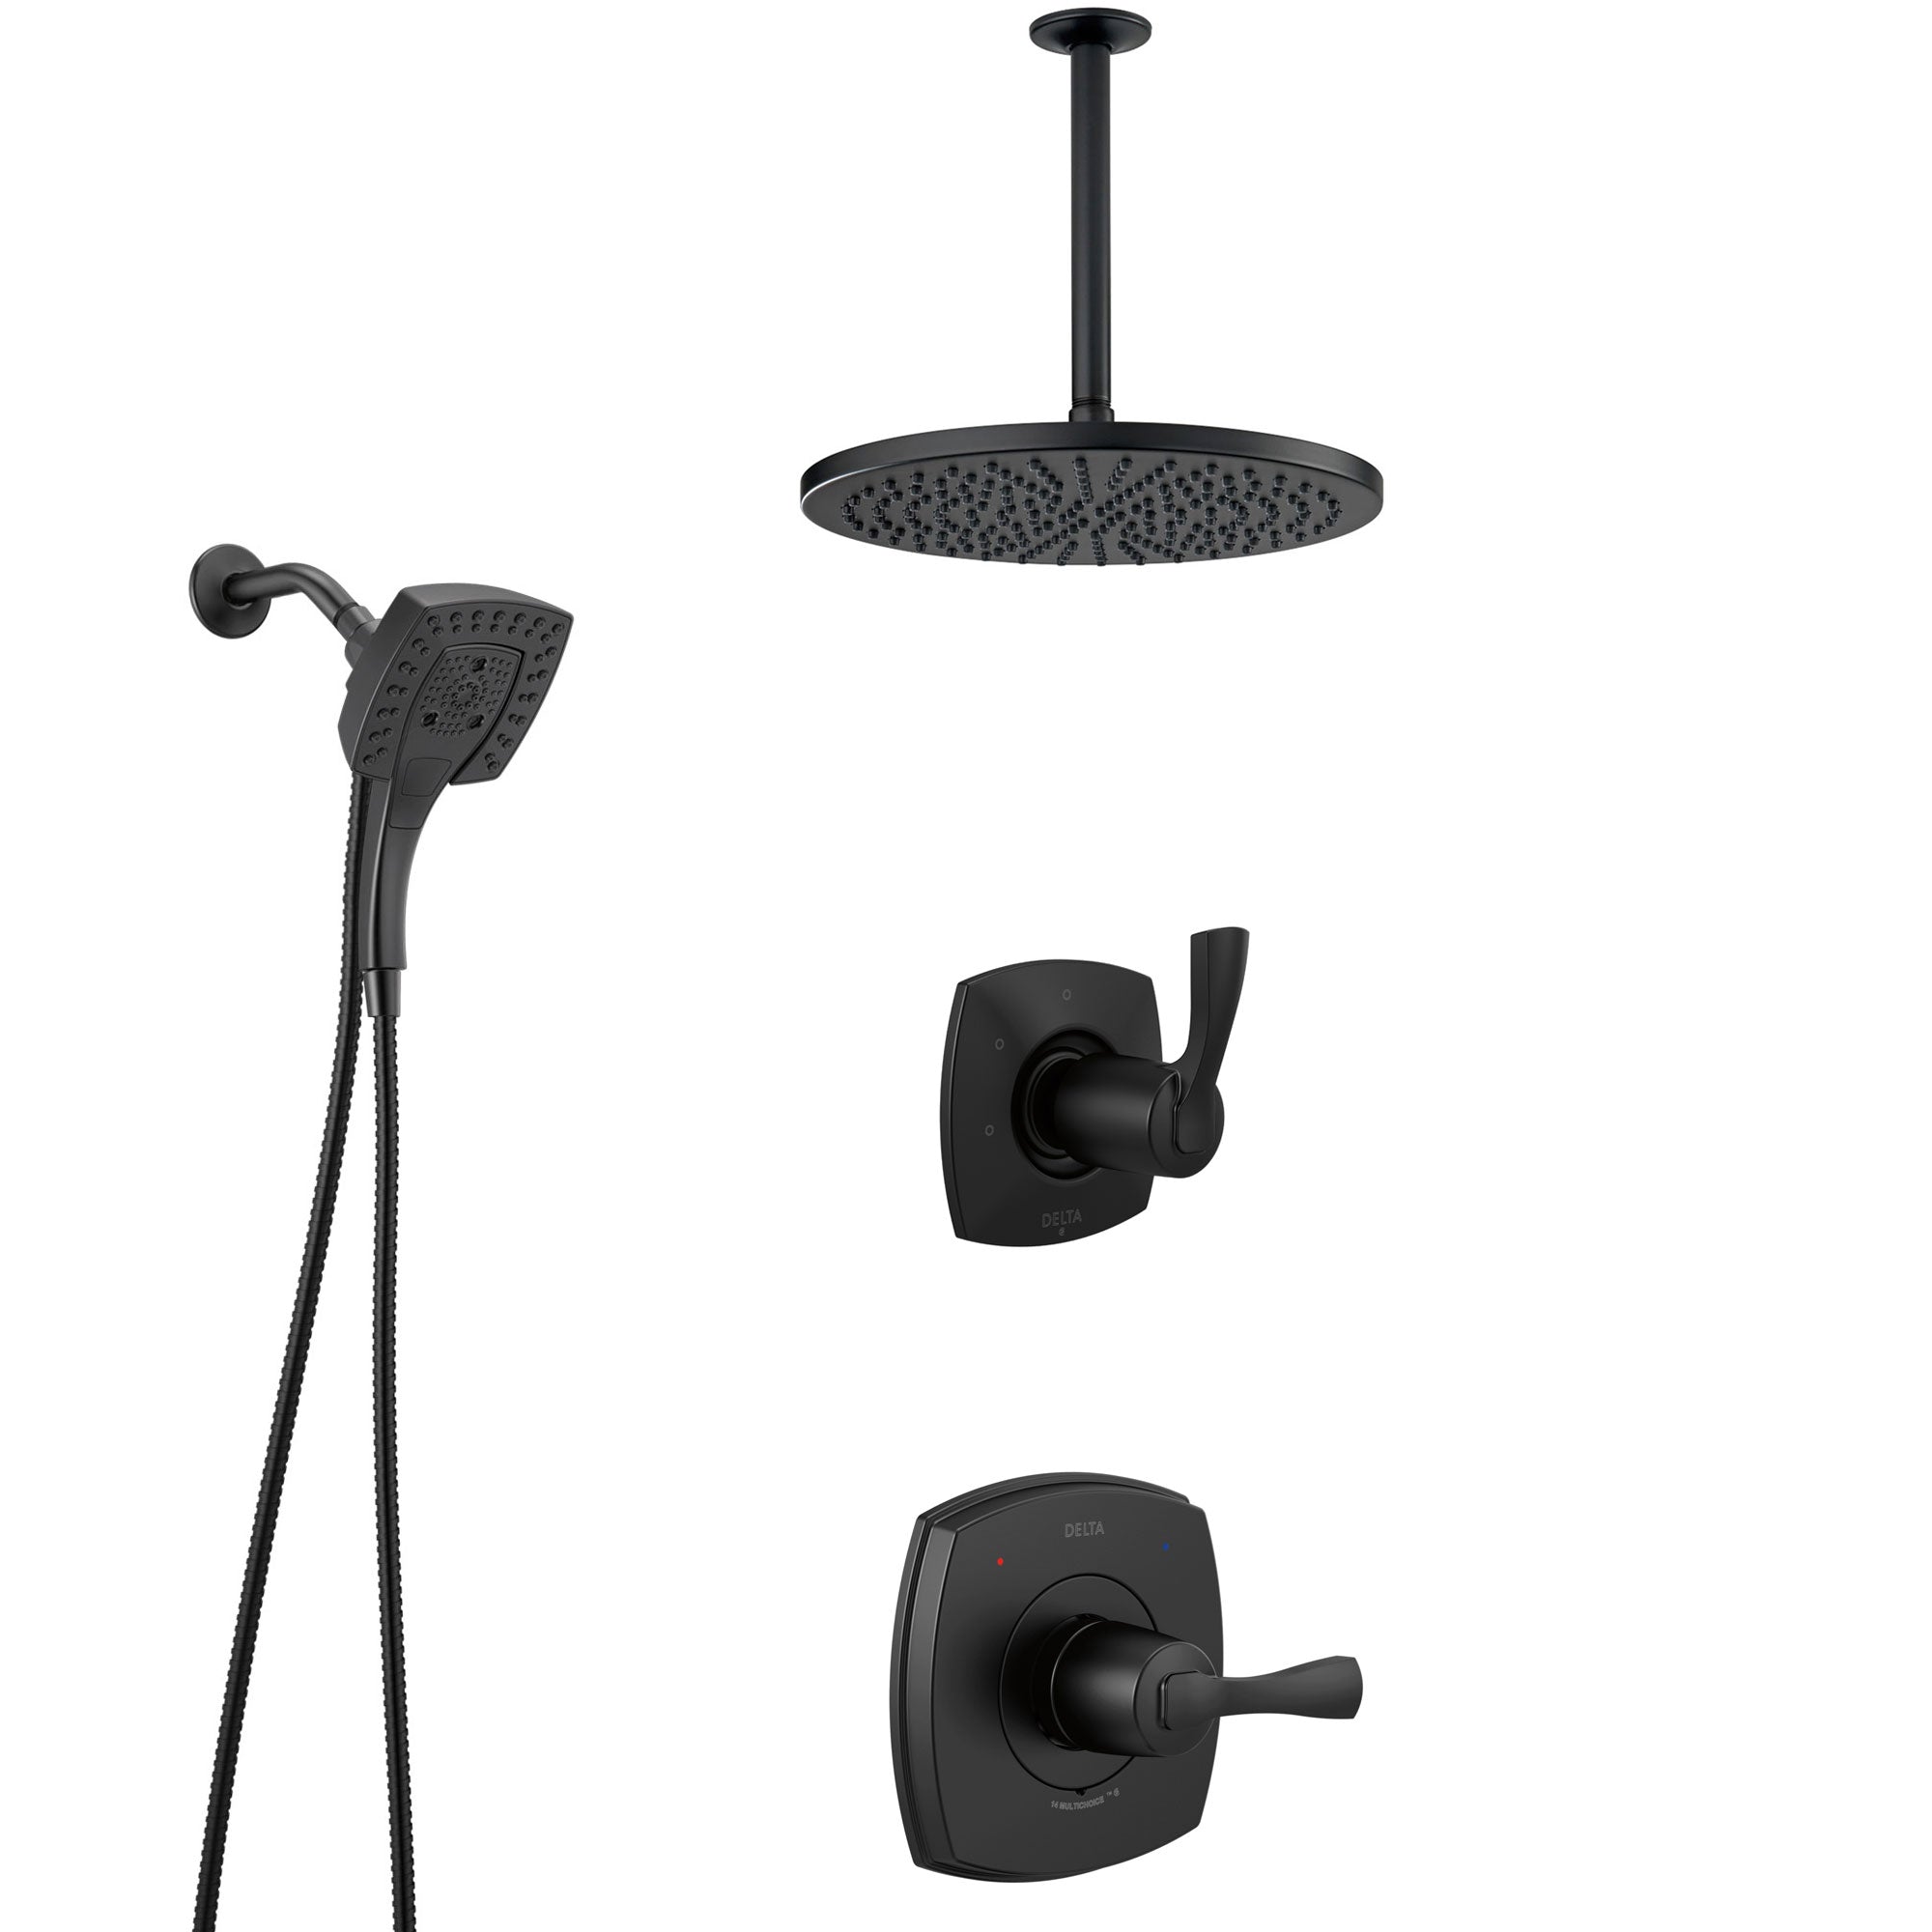 Delta Stryke Matte Black Finish Shower System with Diverter, Large Modern Ceiling Showerhead, and In2ition Detachable Hand Shower Spray SS14763BL9